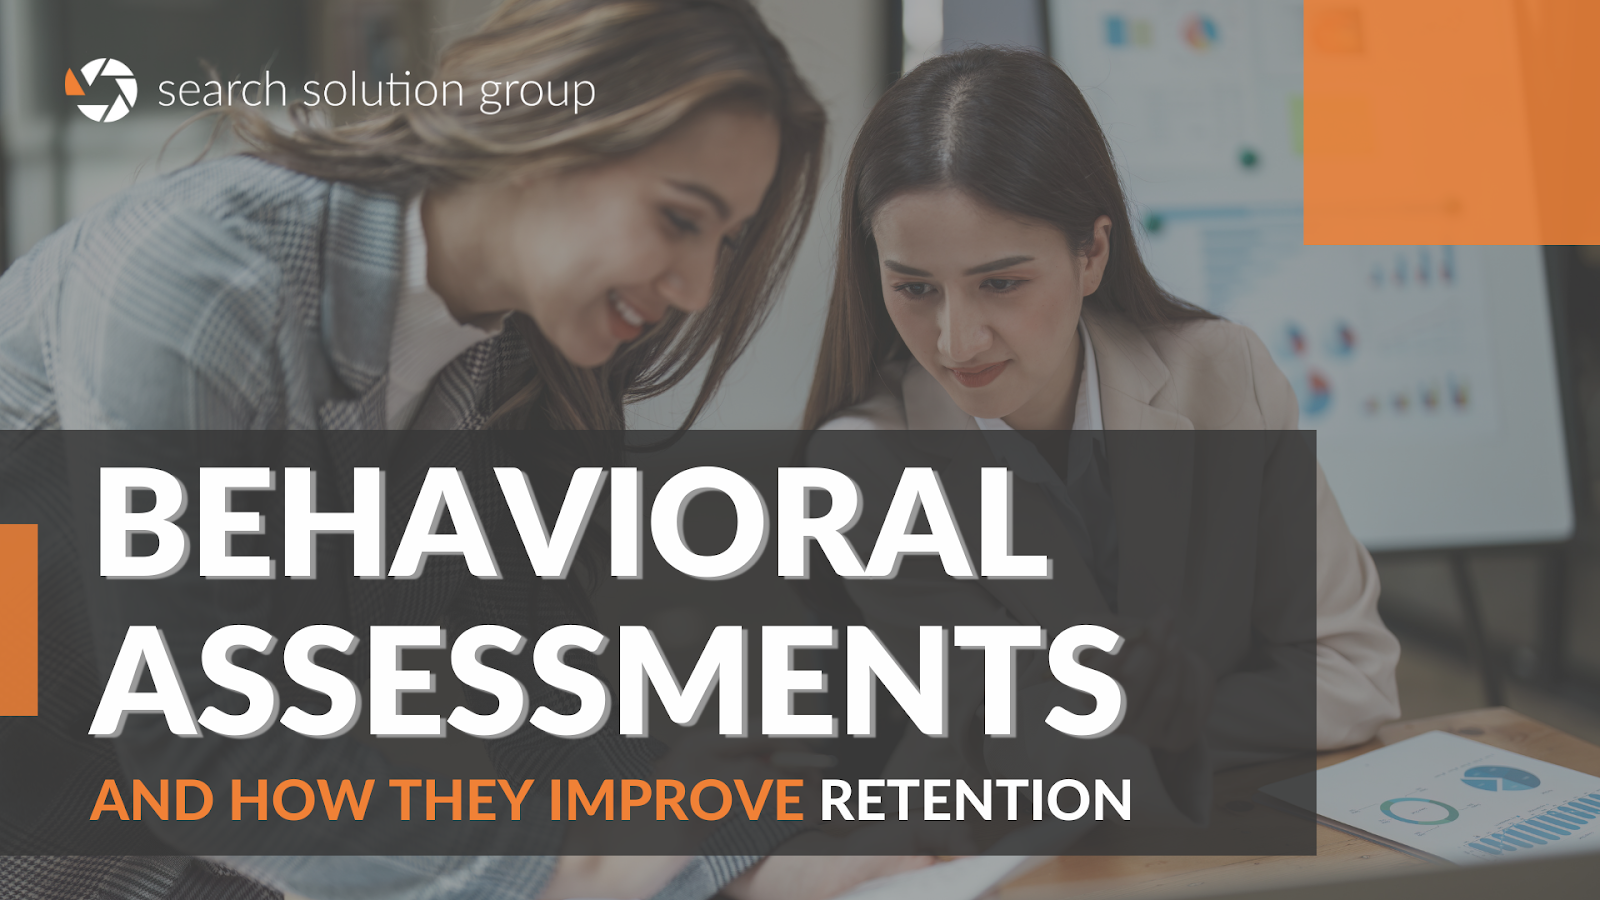 Improving Retention with Behavioral Assessments: Top 5 Tools and Their Pros and Cons